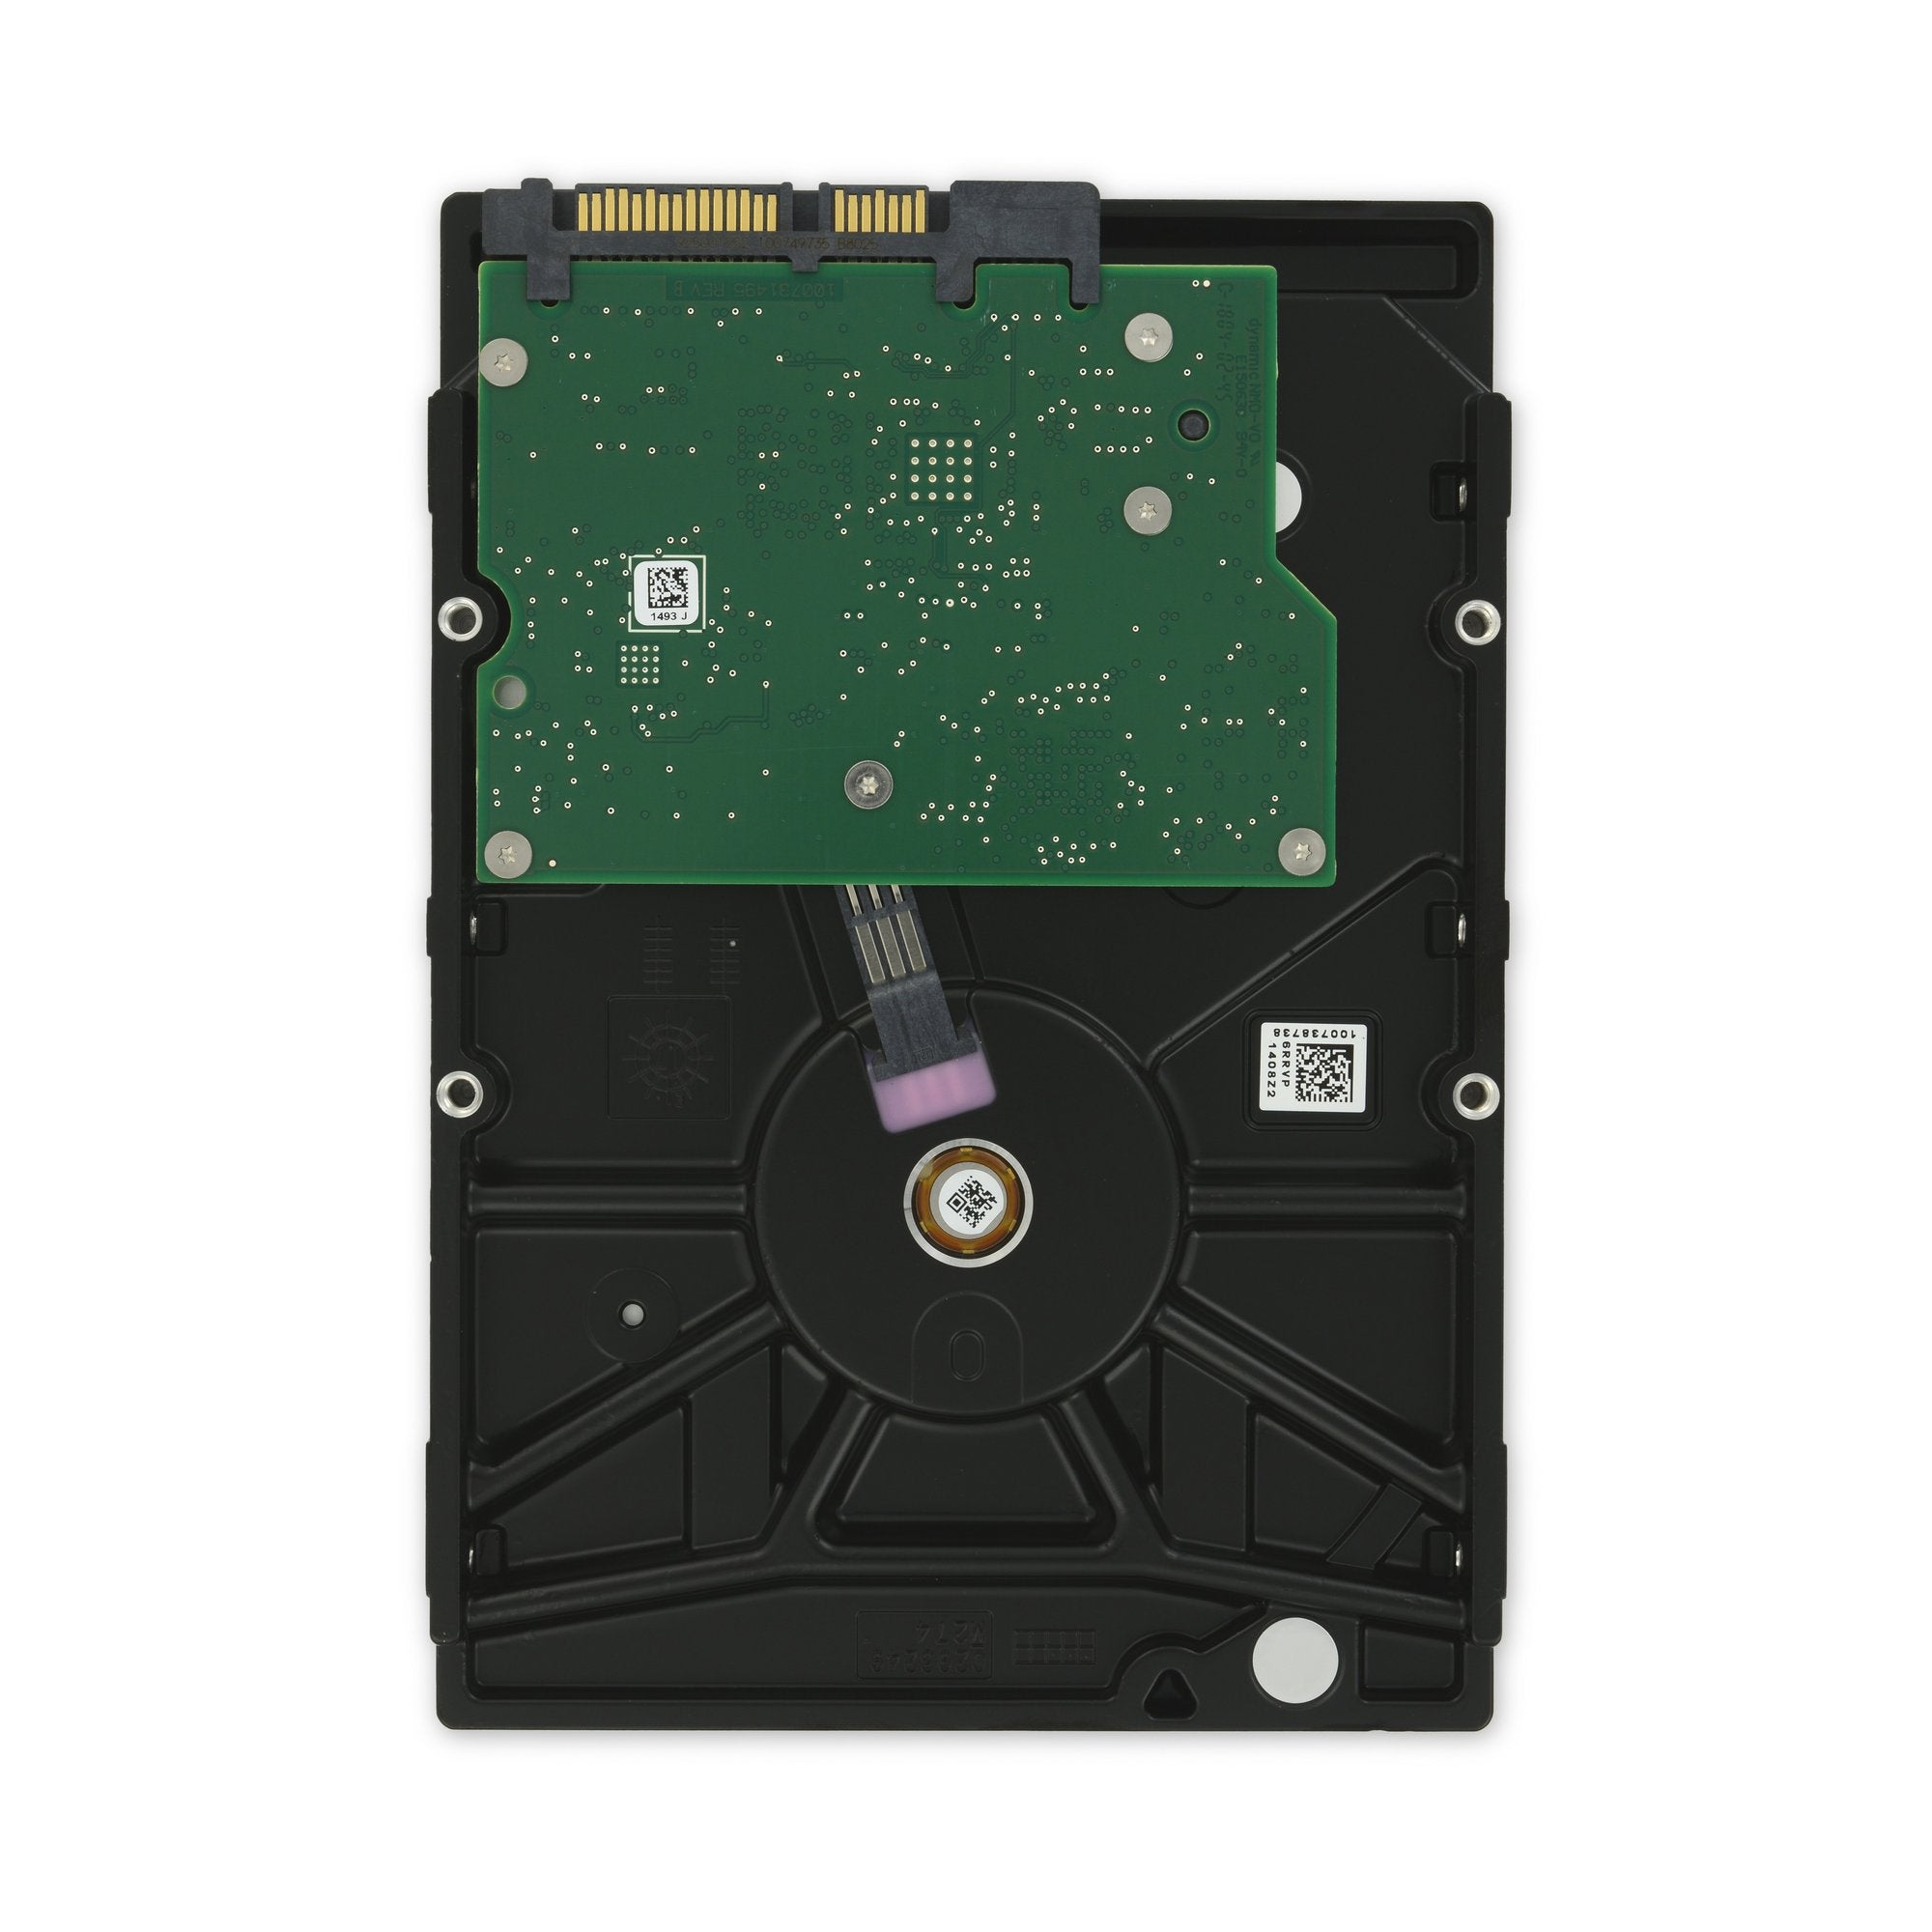 2 TB SSD Hybrid 3.5" Hard Drive New Part Only